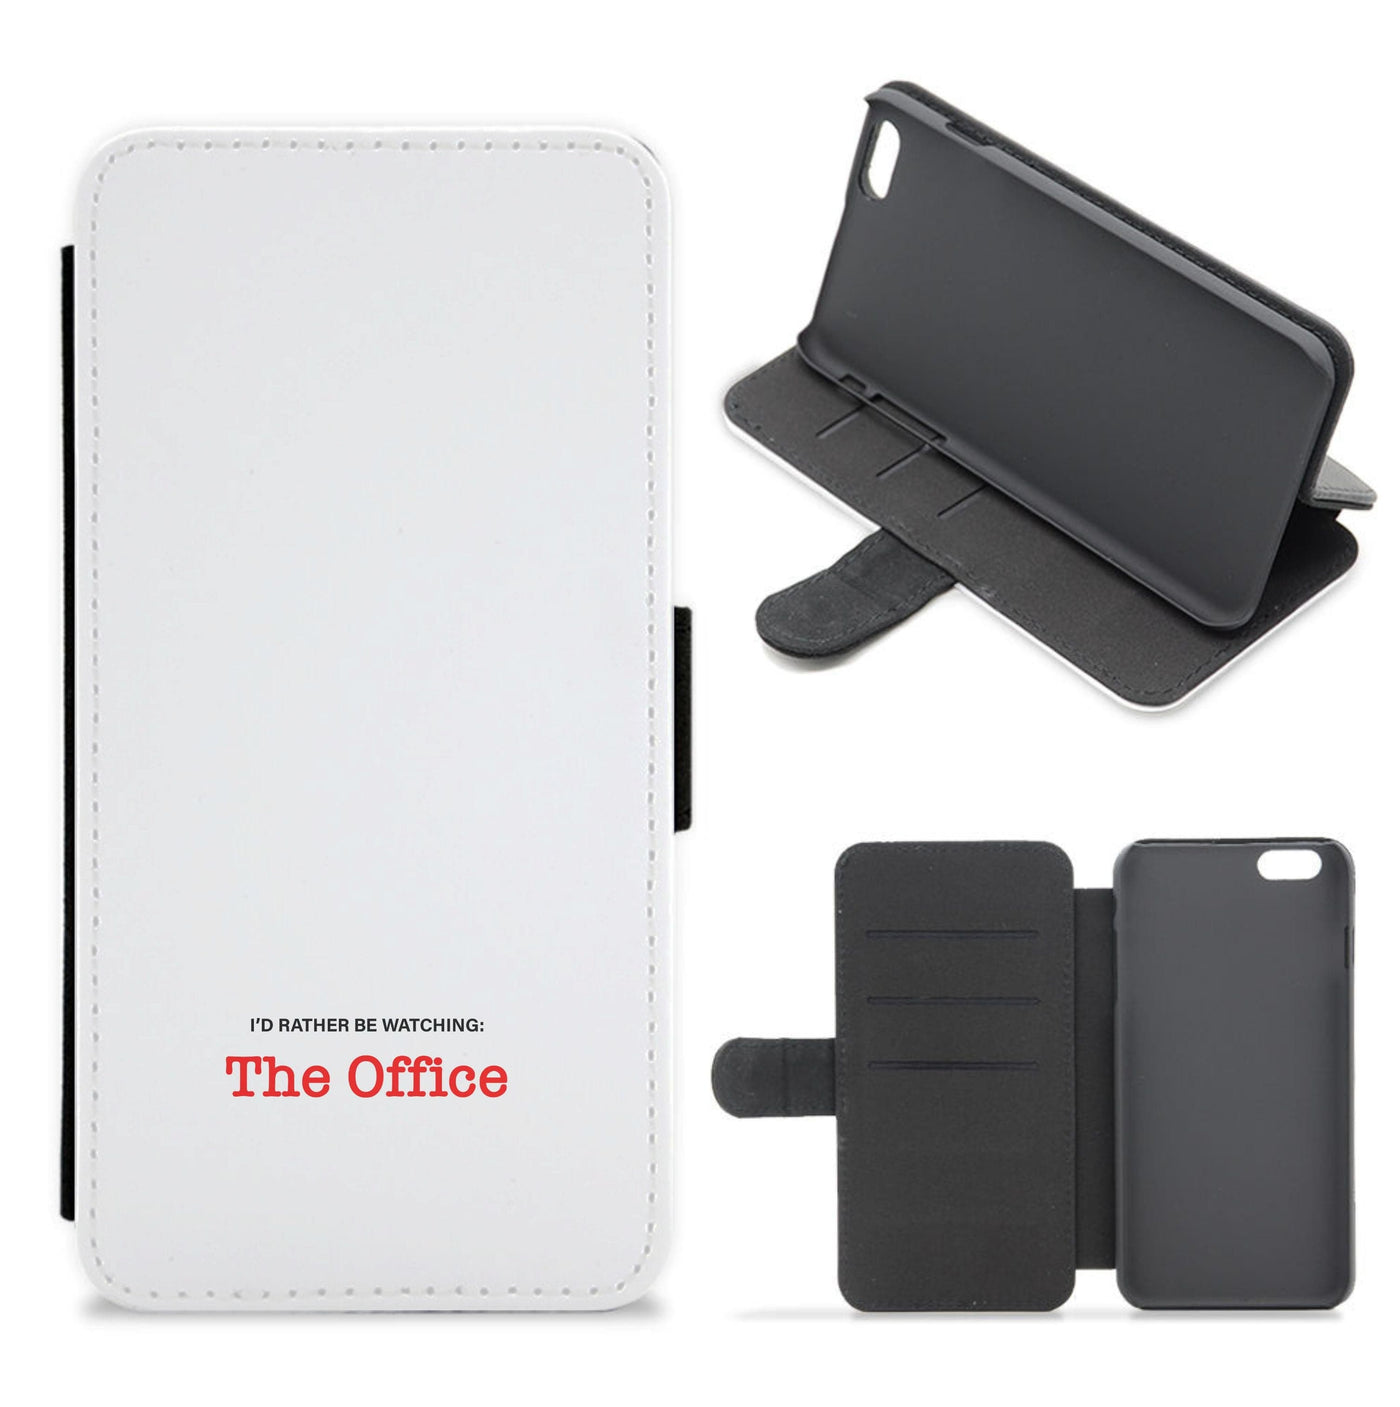 I'd Rather Be Watching The Office - The Office Flip / Wallet Phone Case